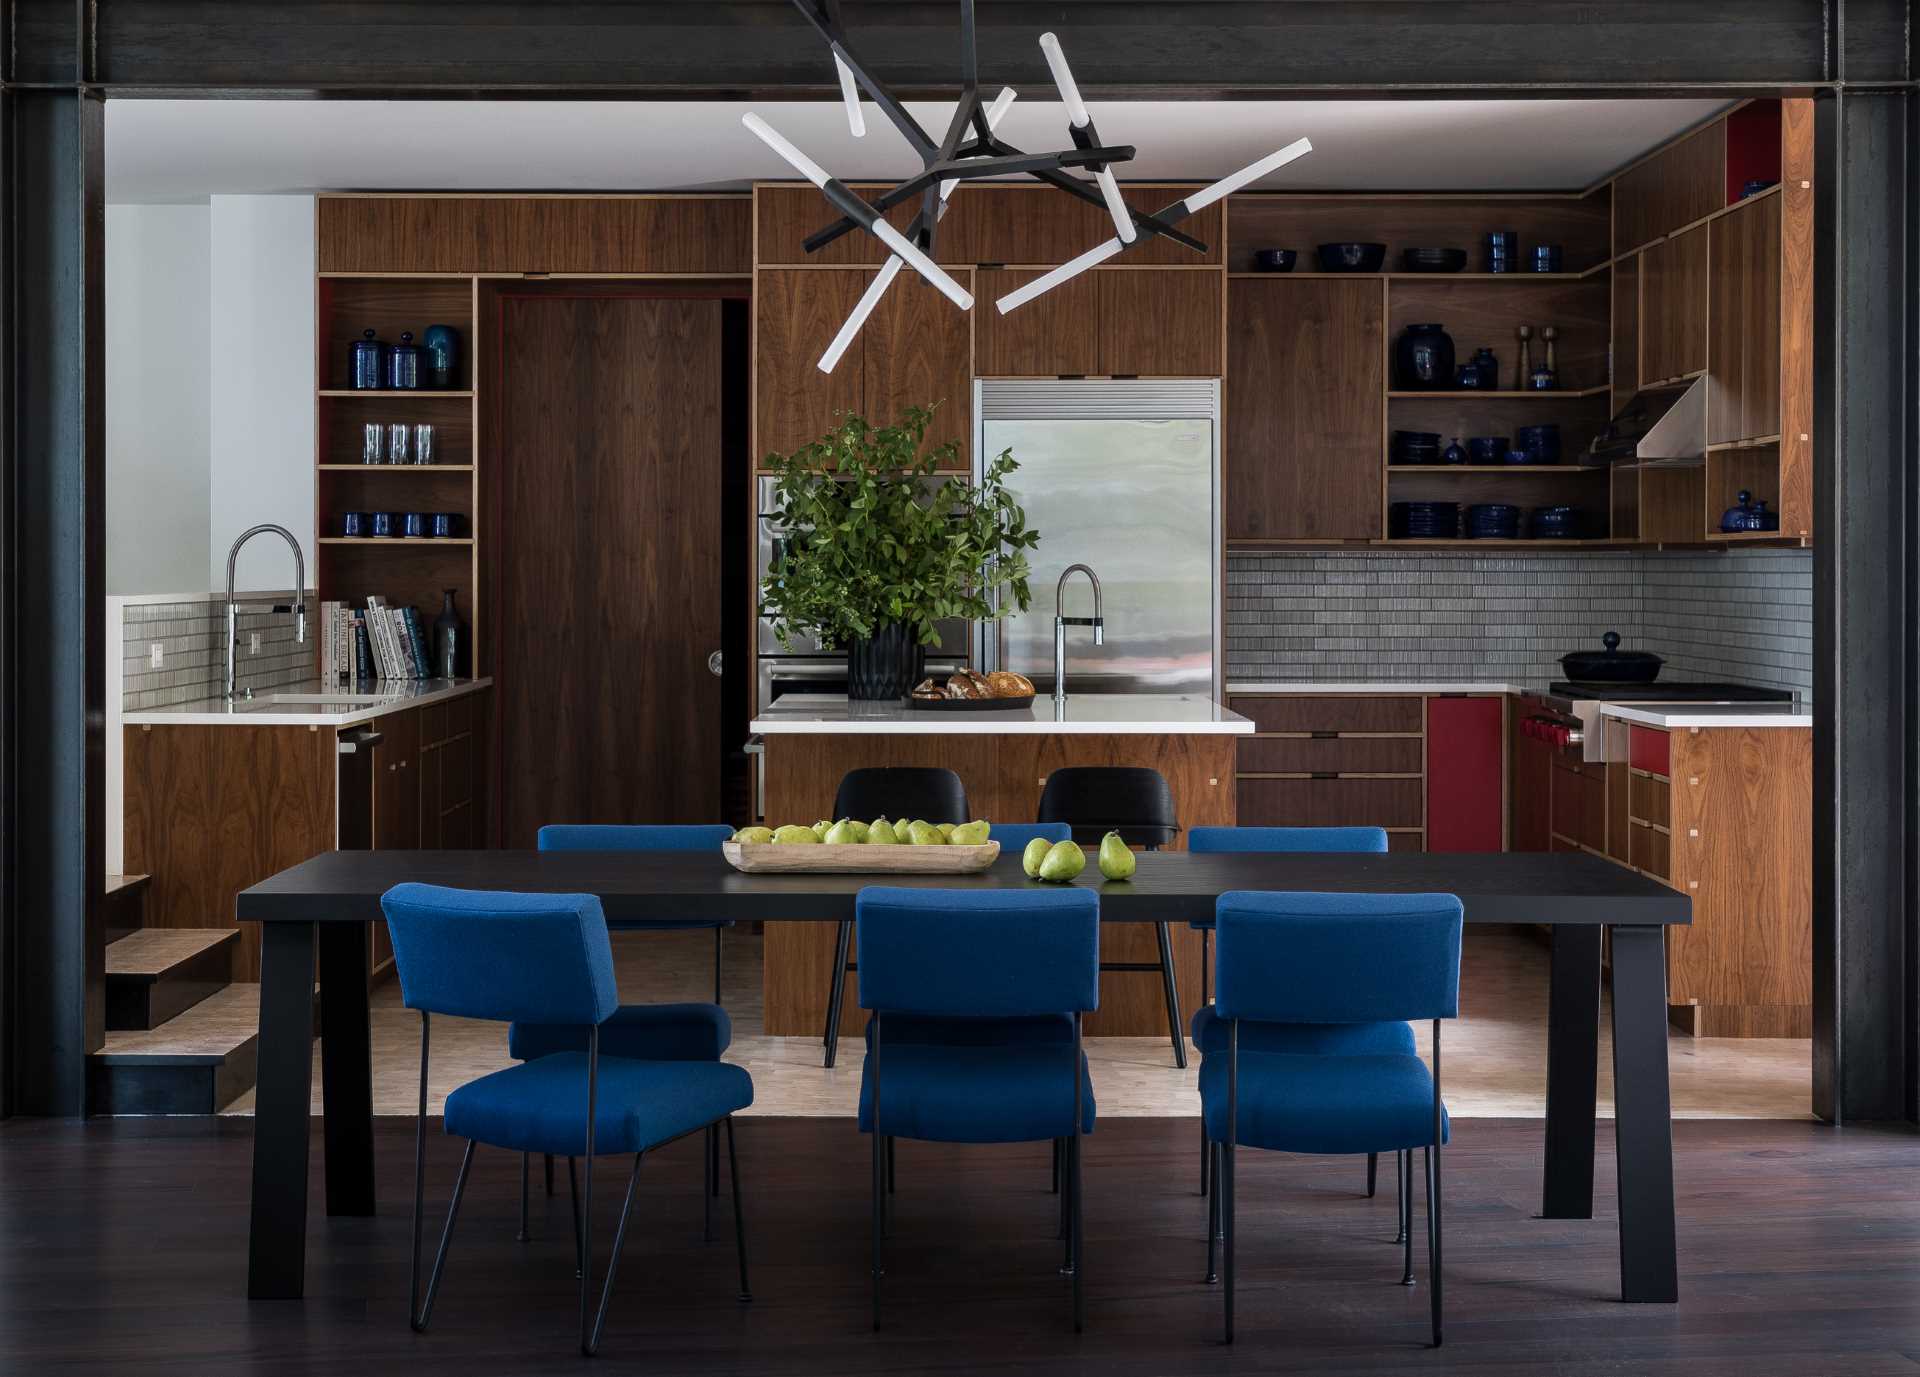 A modern open plan dining room and kitchen, with blue chairs and walnut cabinets.